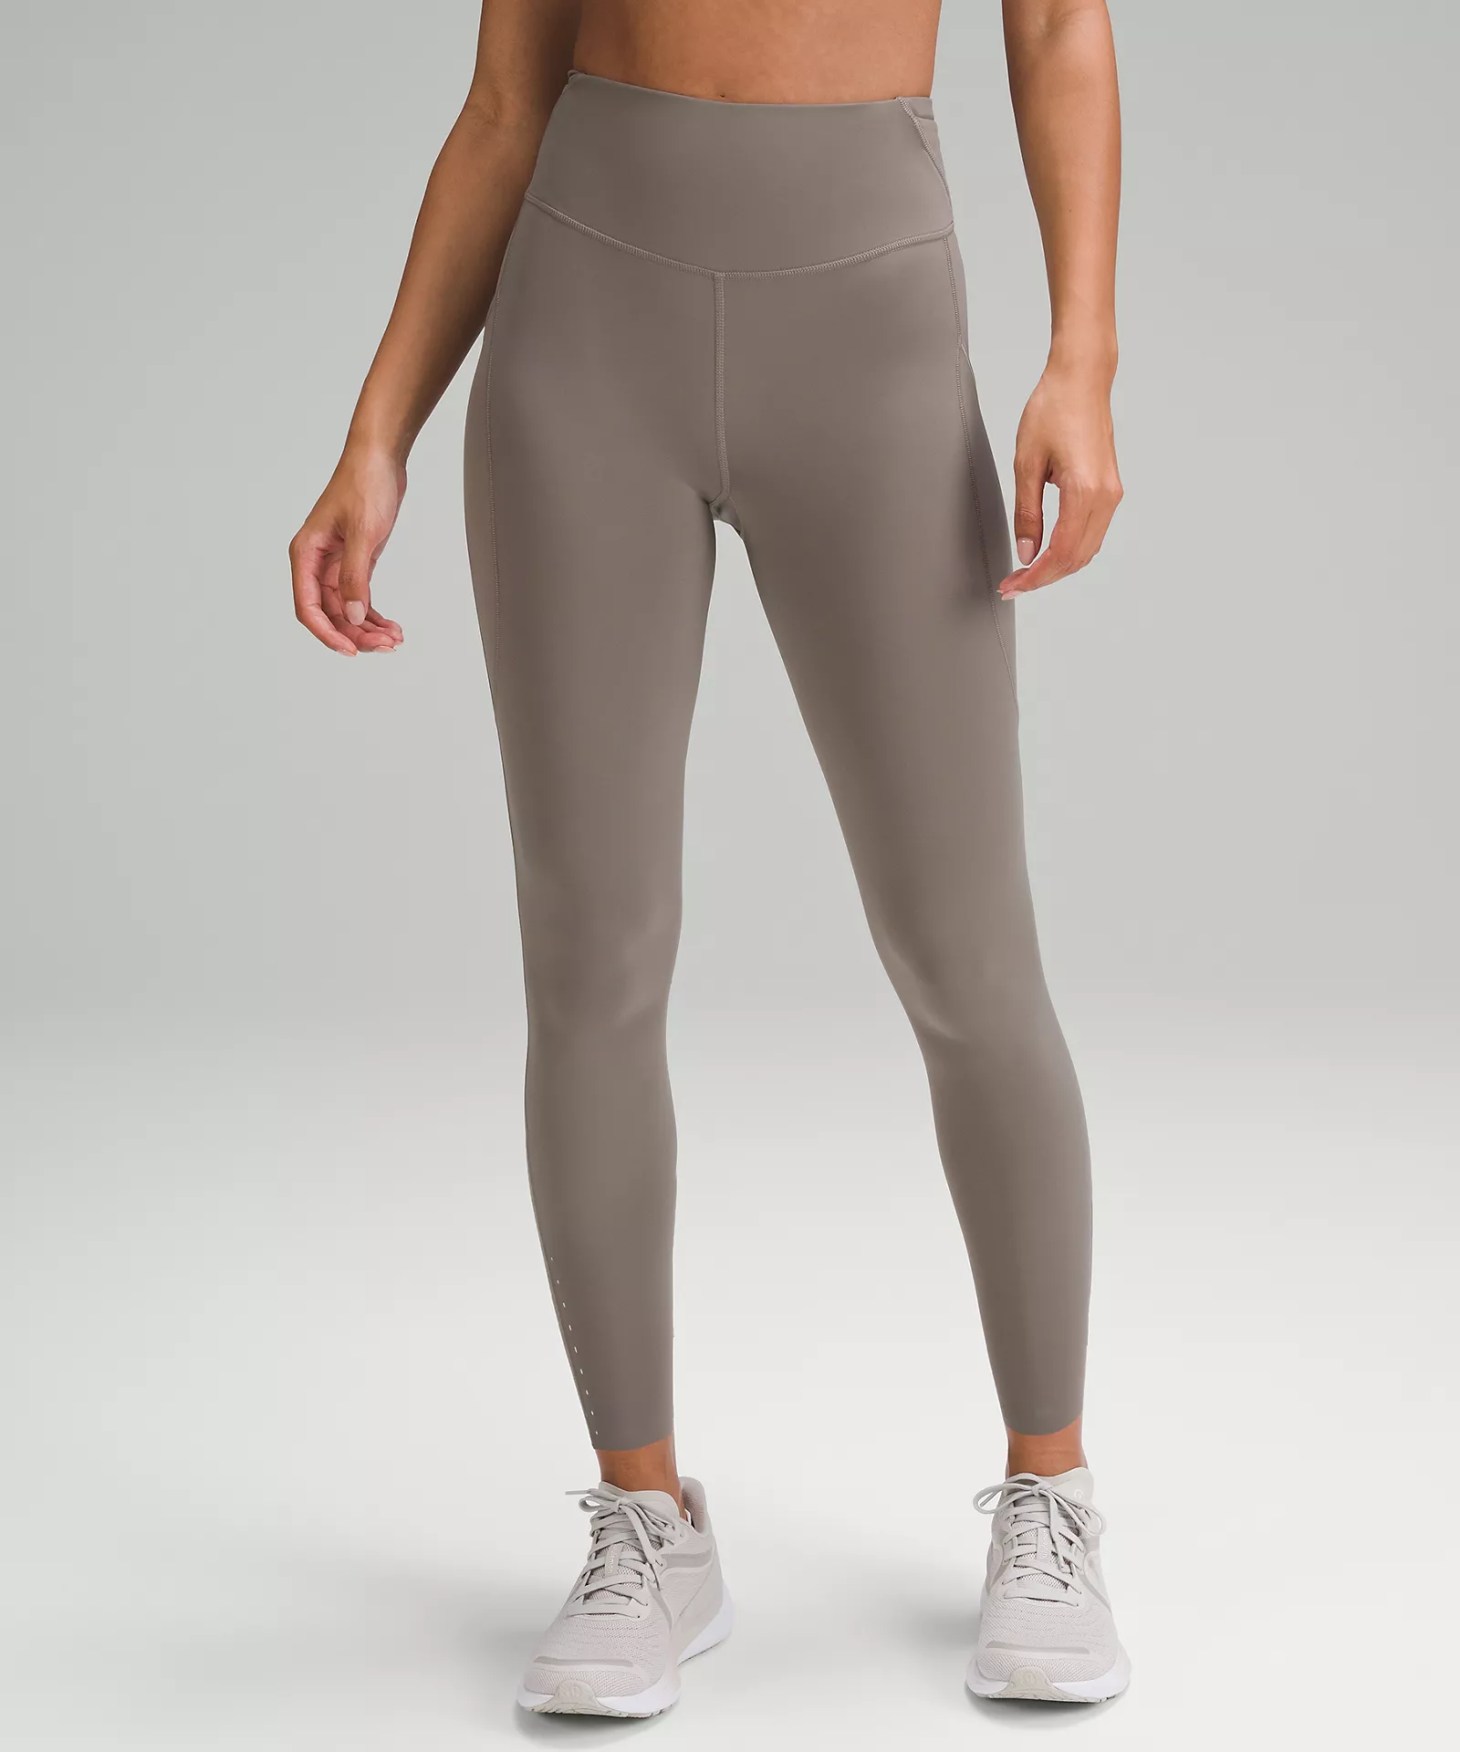 fast and free tights, one of the best lululemon products